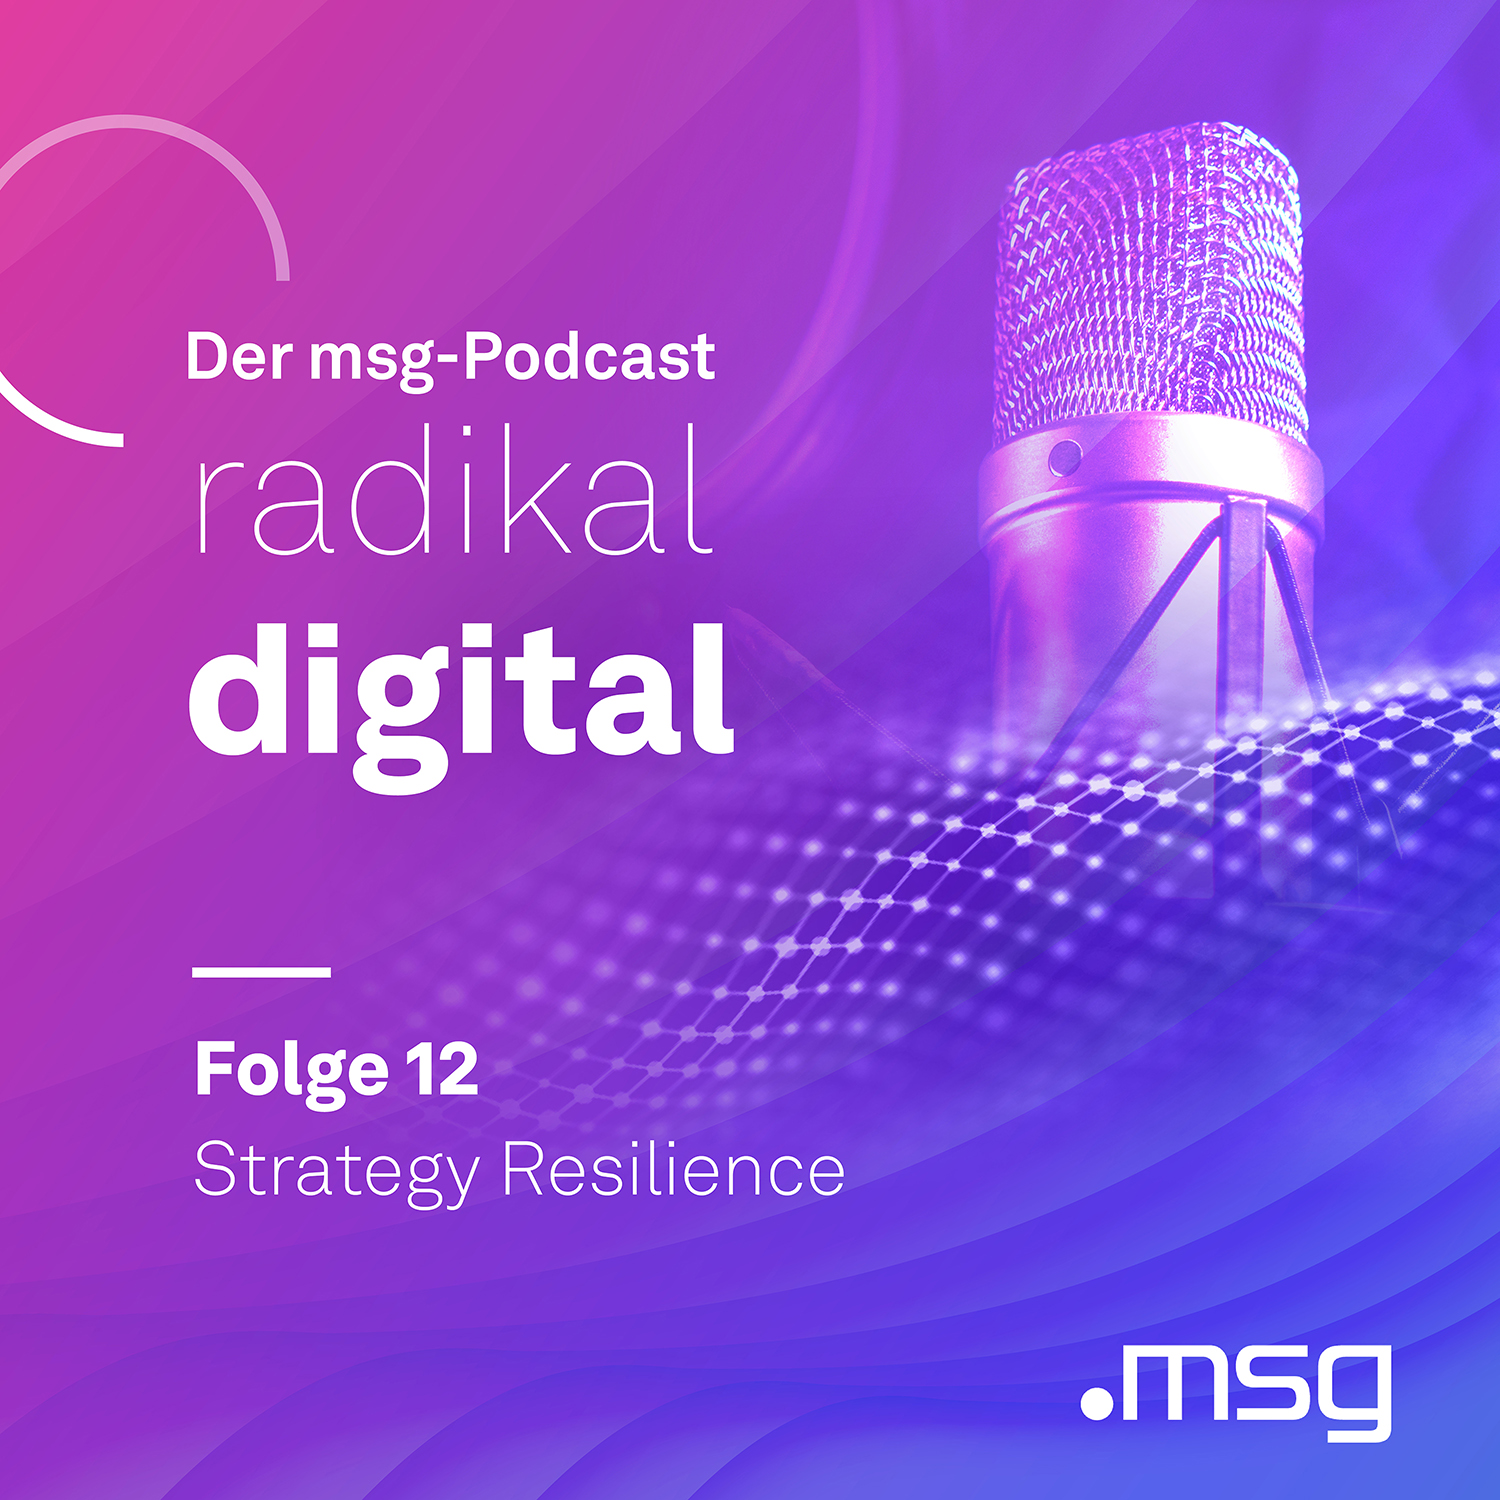 KeyVisual Folge12 msg Podcast Strategy Resilience 